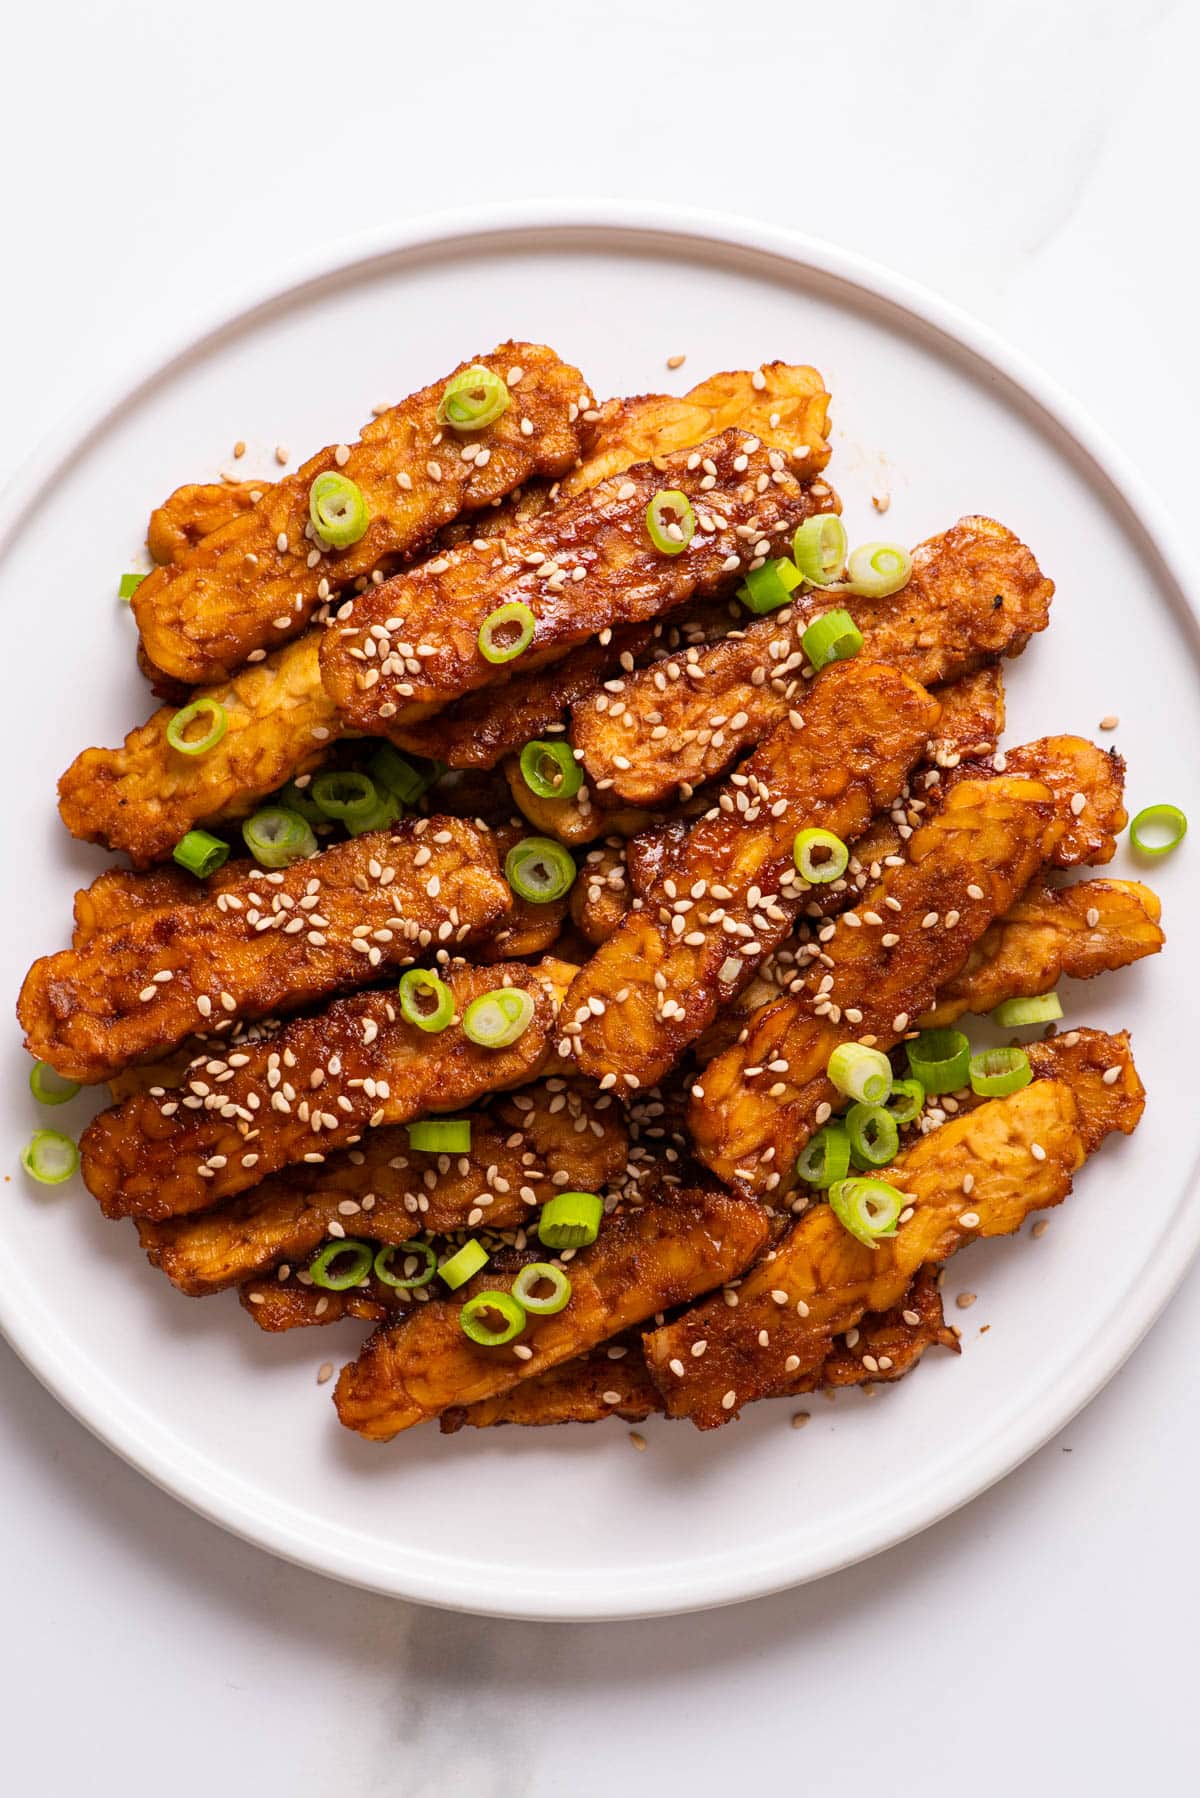 Baked marinated tempeh strips on white plate.